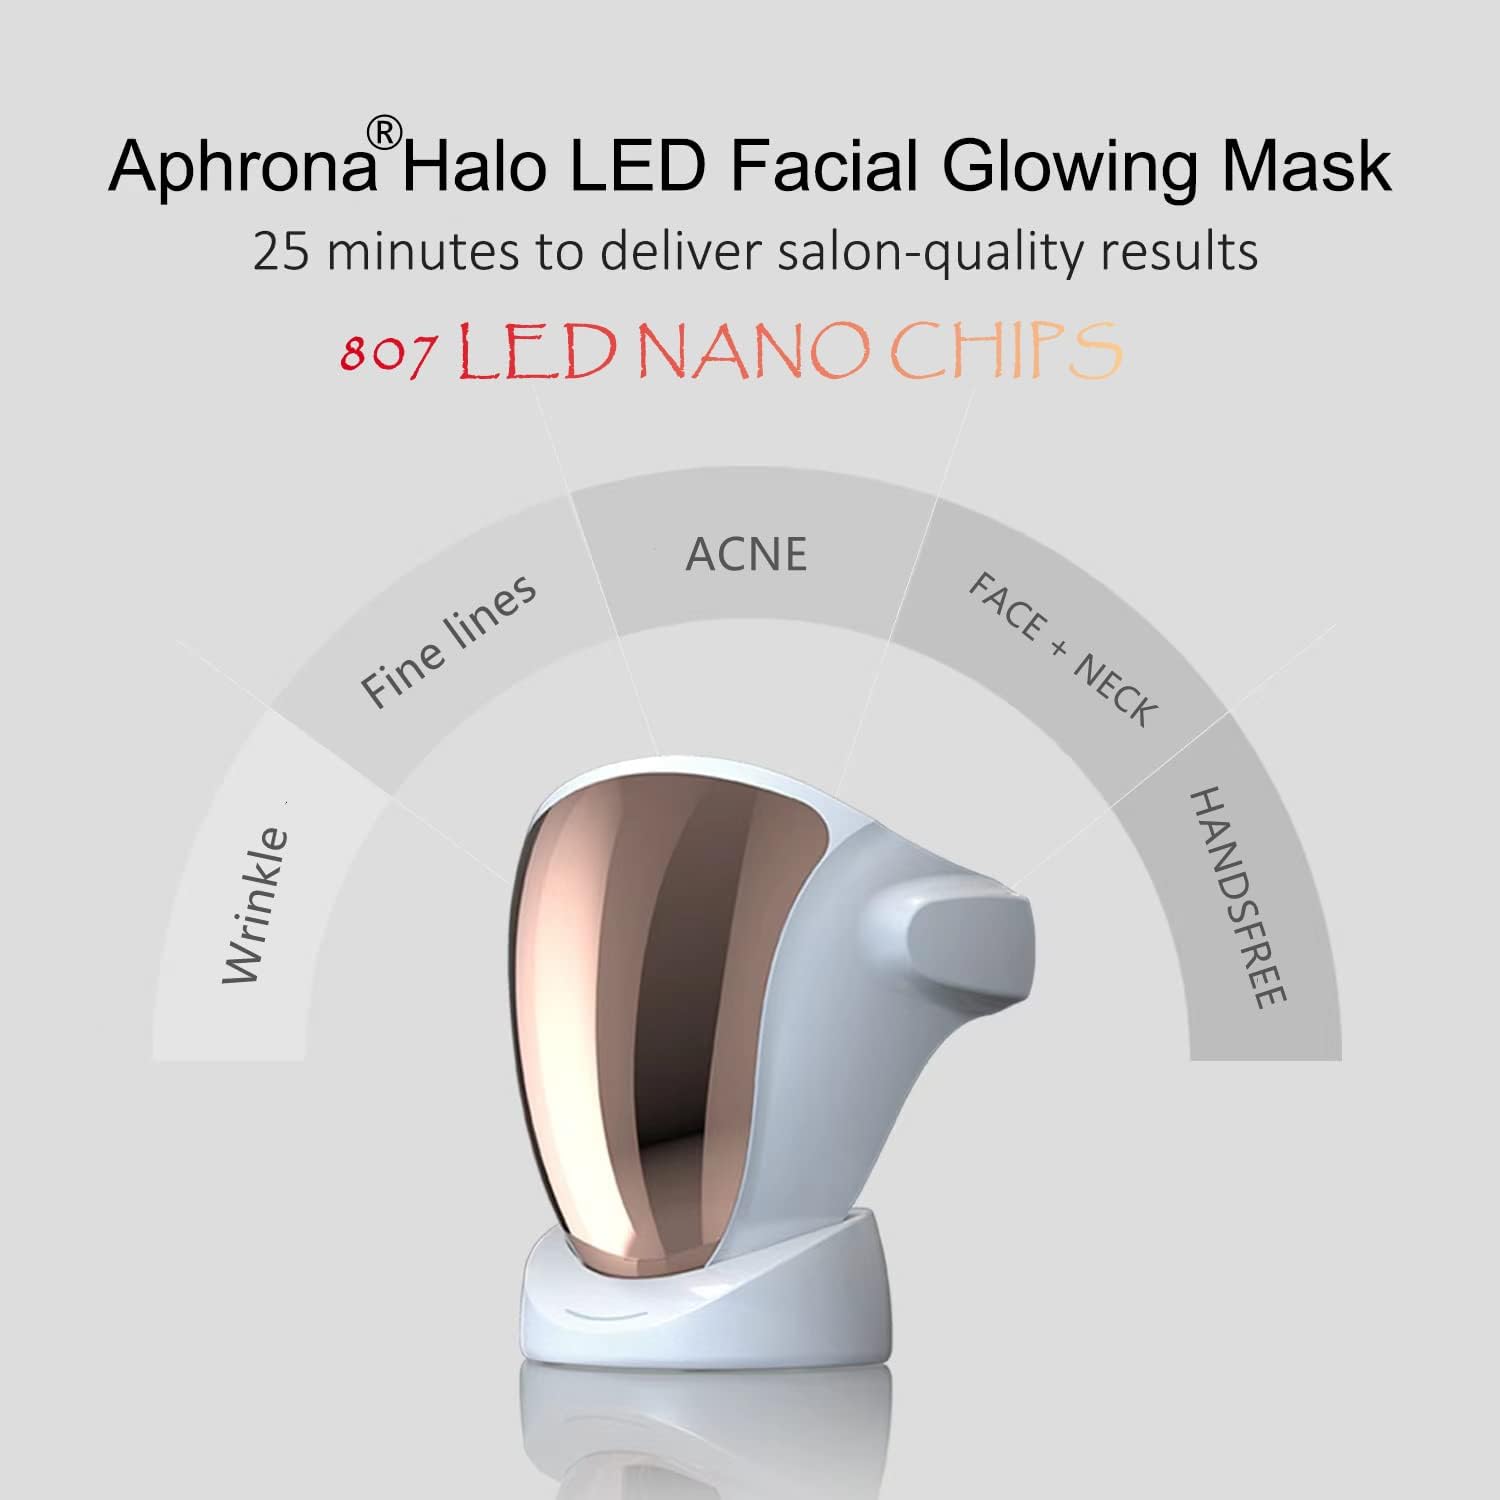 Aphrona LED Face Mask Light Therapy Review